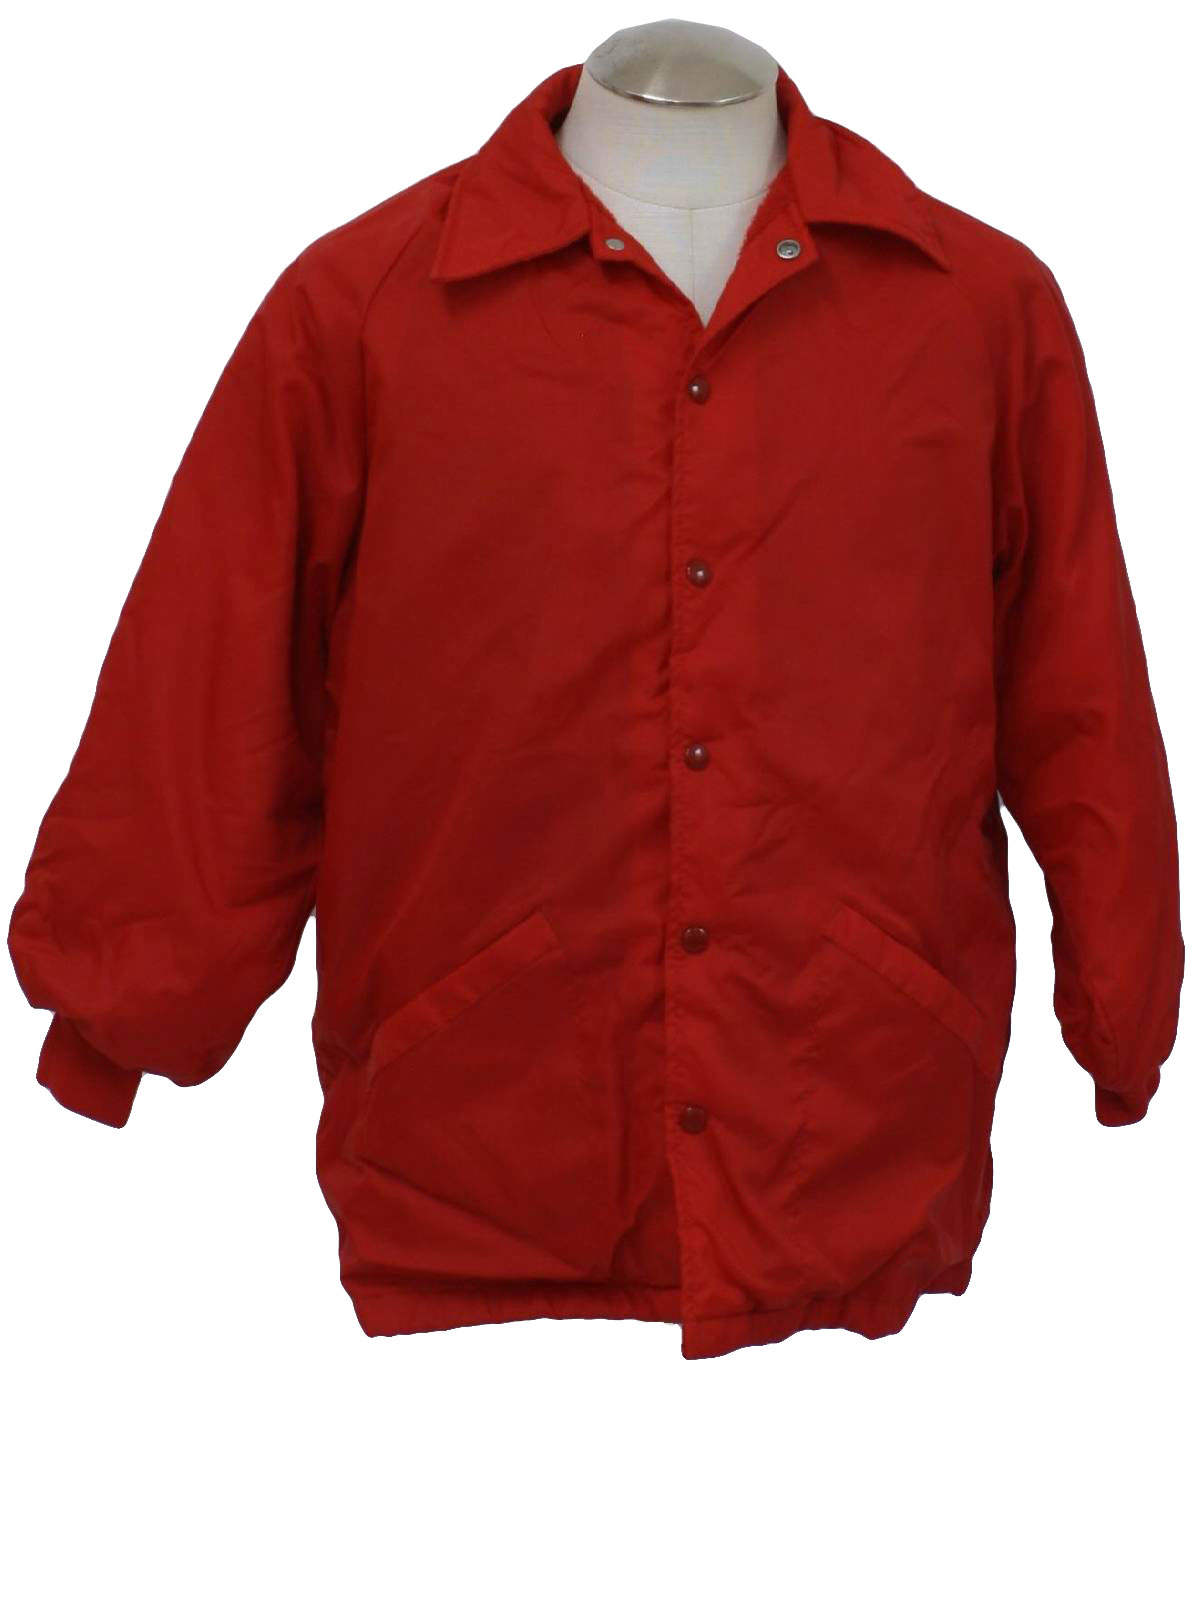 Retro 1970s Jacket: 70s -Swingster- Mens red nylon with plush acrylic ...